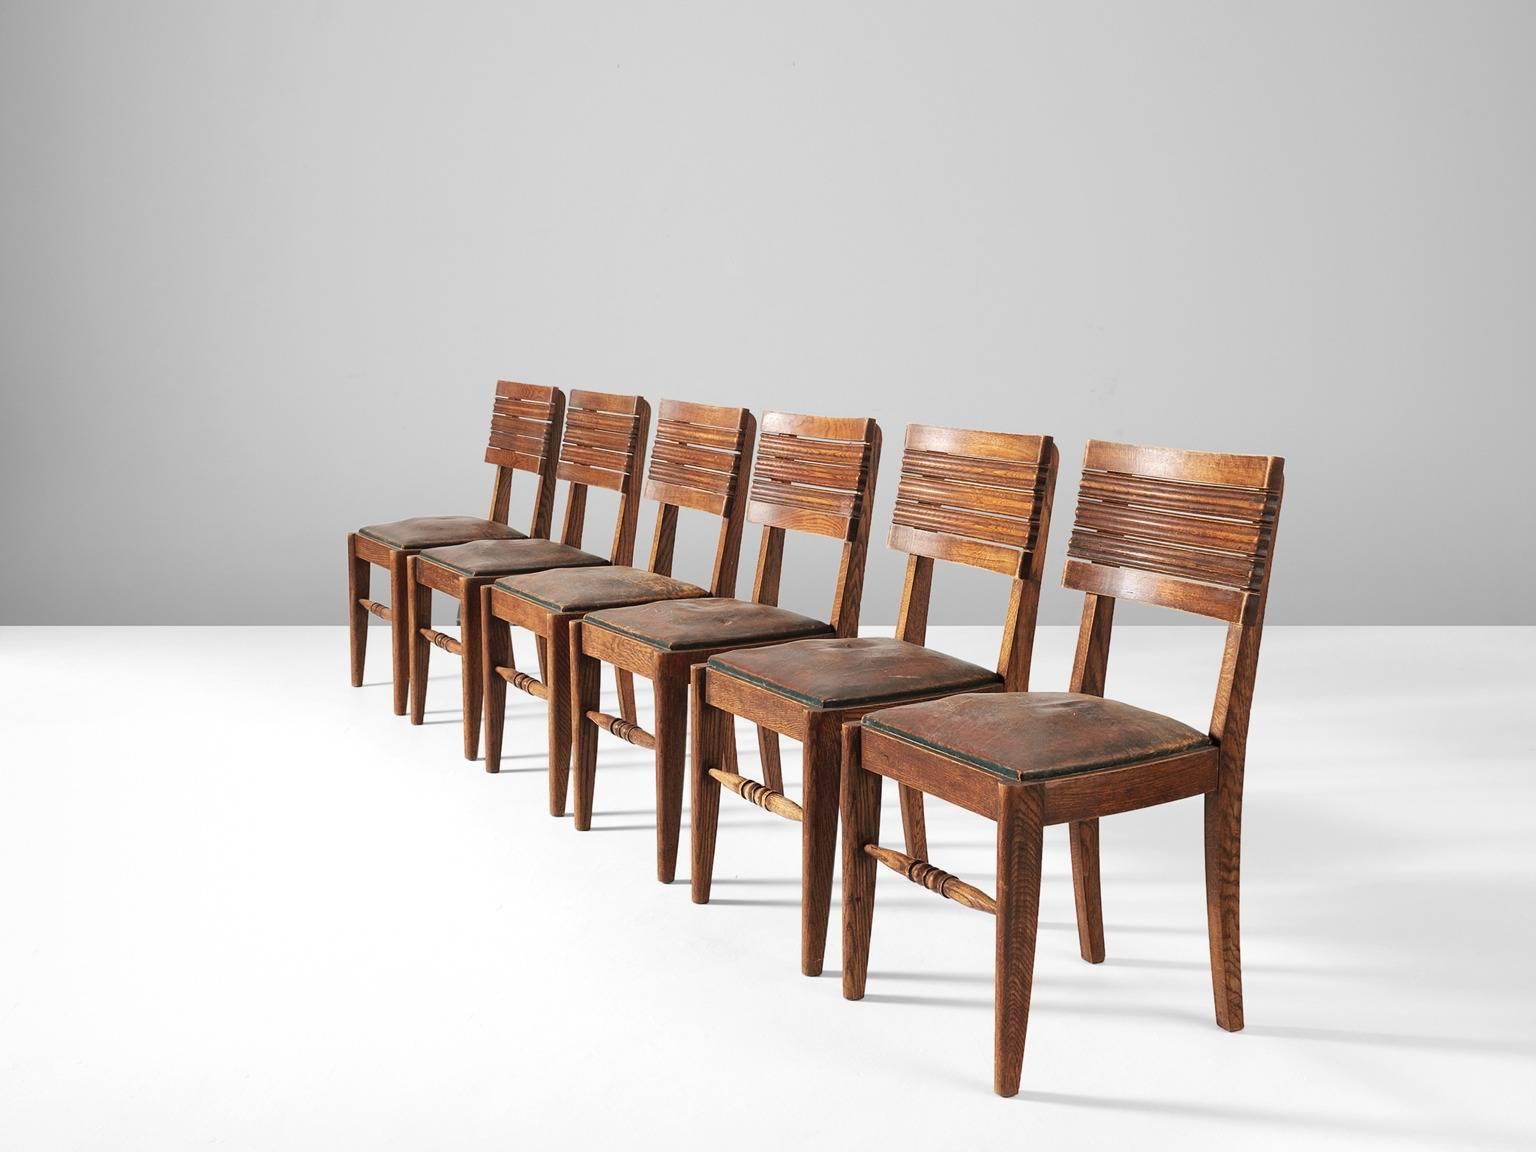 Set of six dining chairs, in oak and leather, by Gaston Poisson, France 1940s.

Dining chairs in solid oak, with beautiful detailed woodcarving and stunning patinated leather. The back of the chair consist of five slightly curved slats: top and